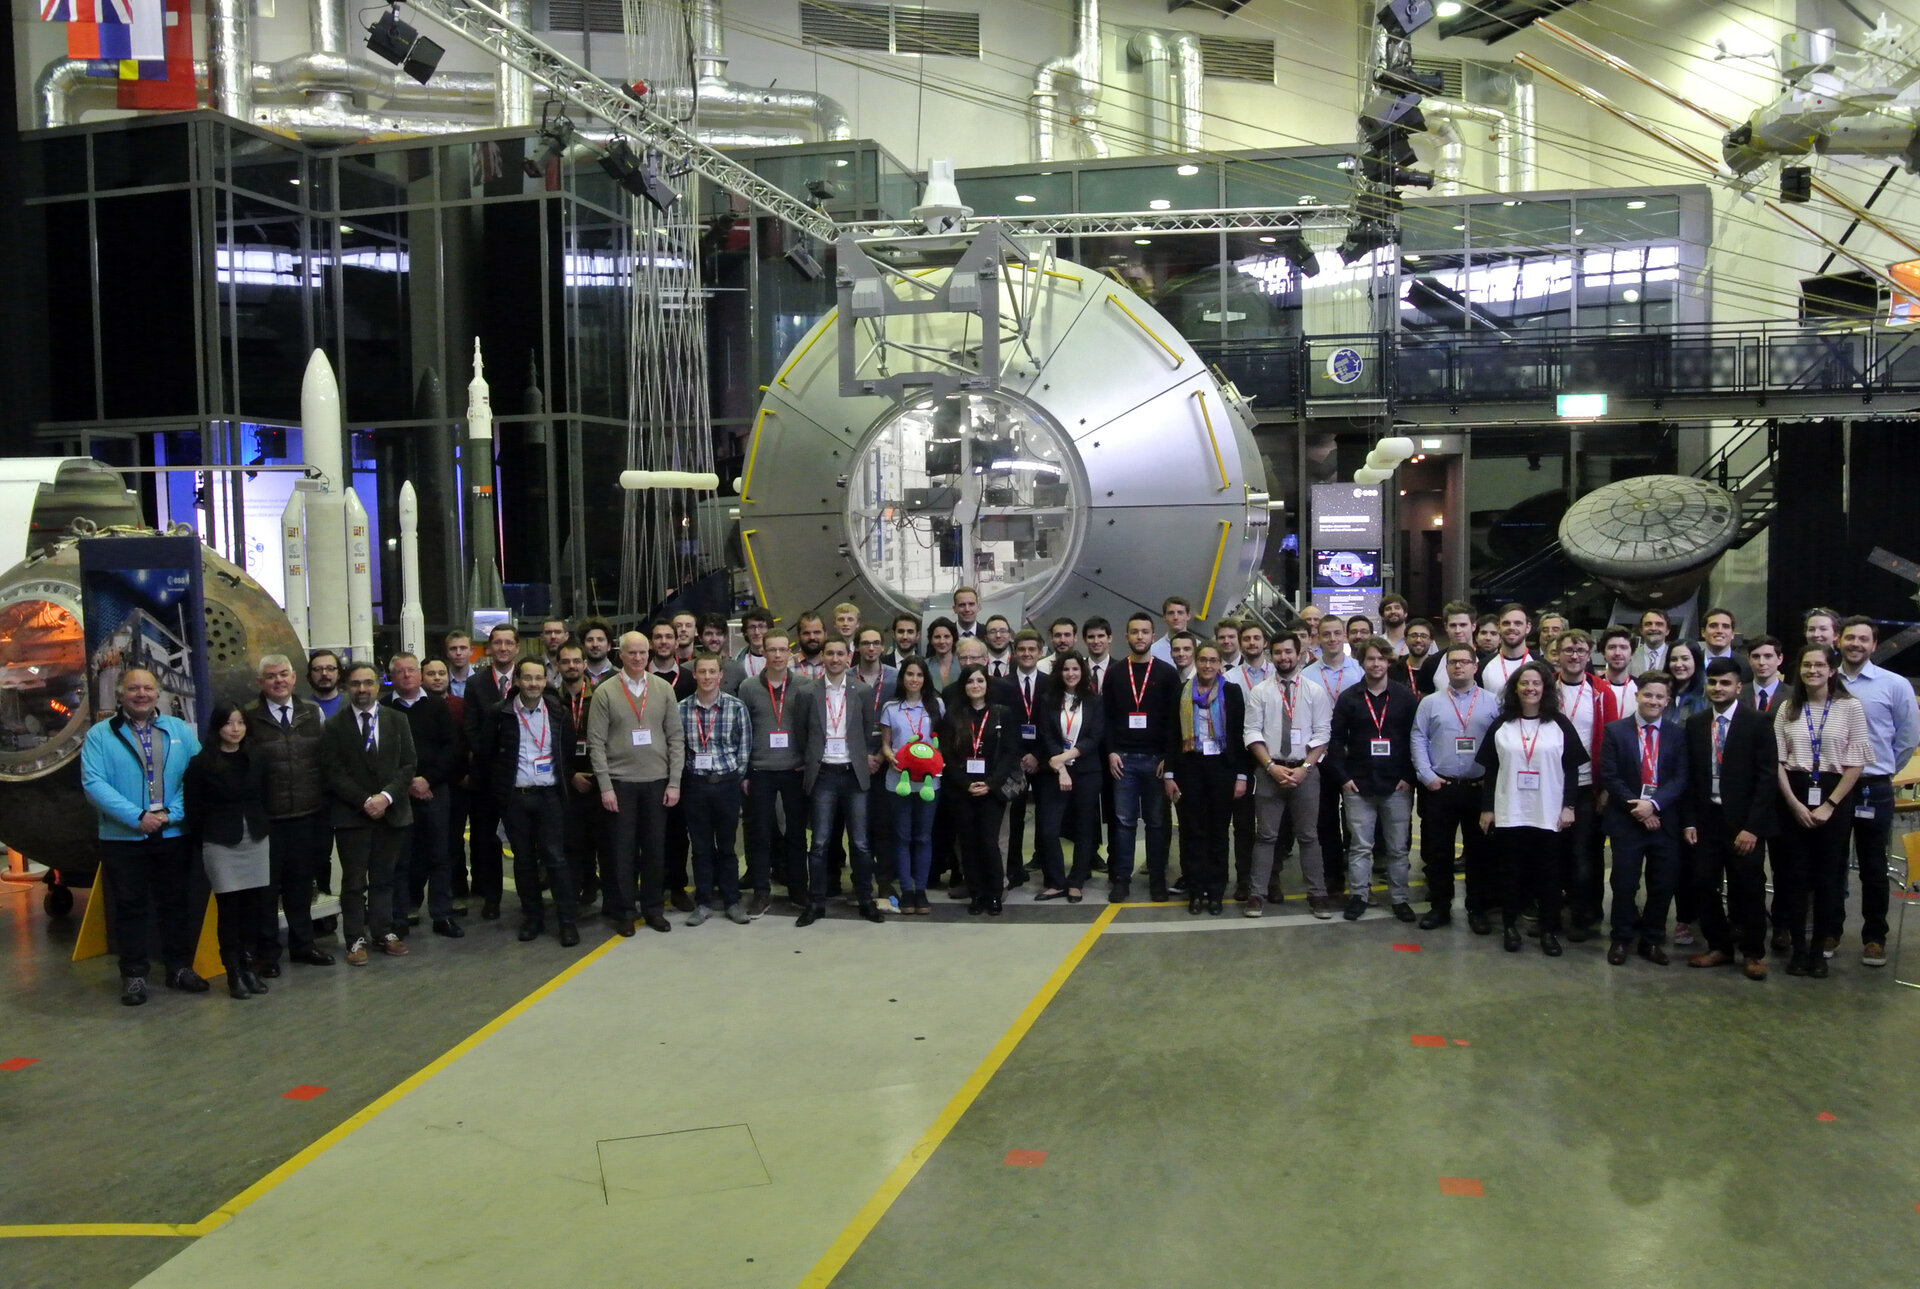 Eight shortlisted CubeSat teams gathered at ESTEC during the Selection Workshop